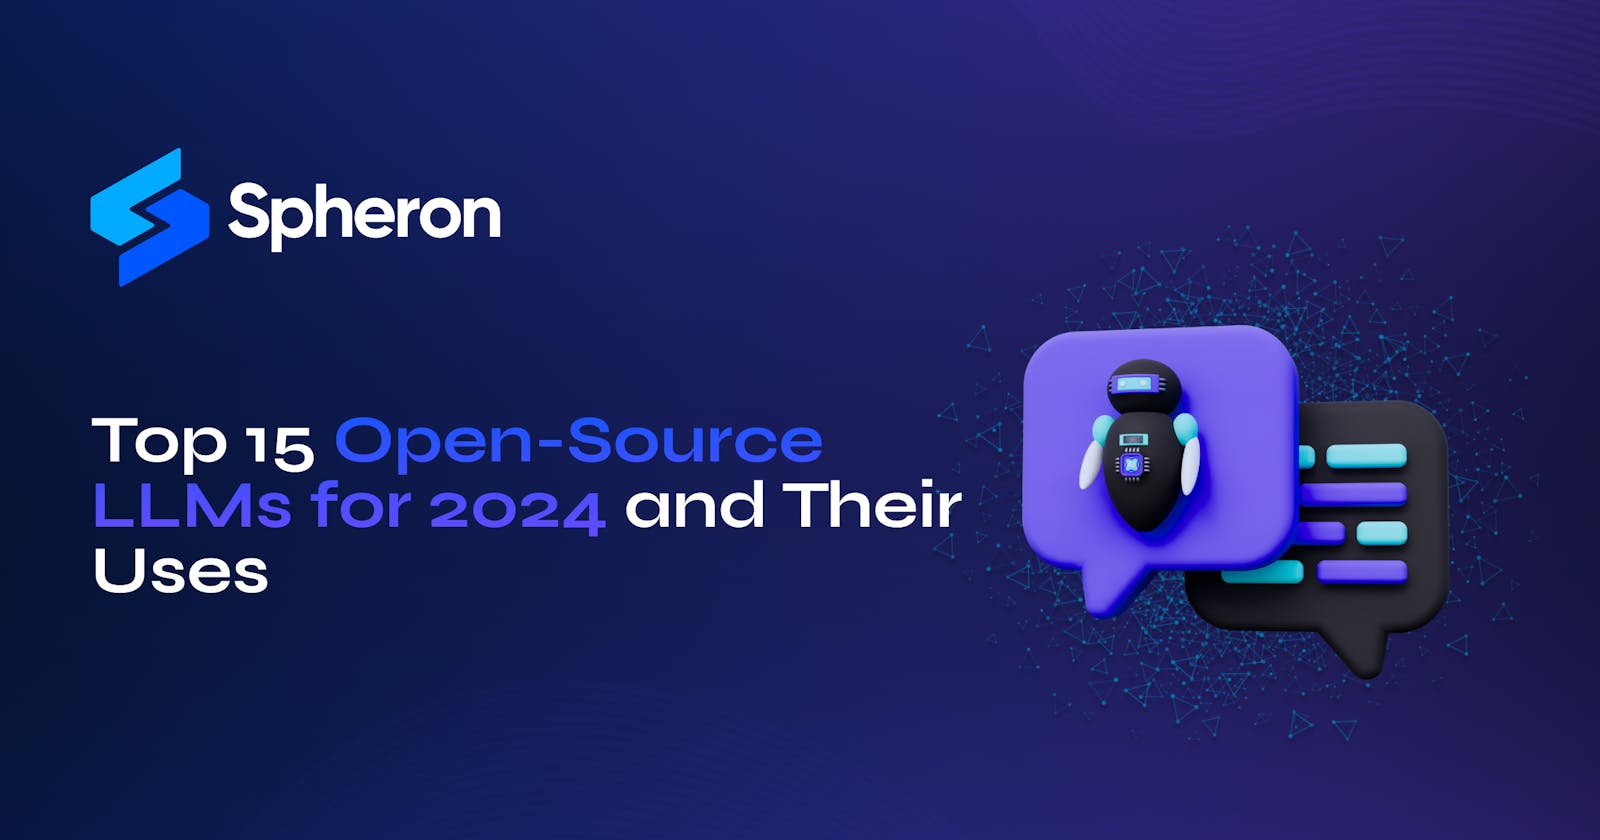 Top 15 Open-Source LLMs for 2024 and Their Uses